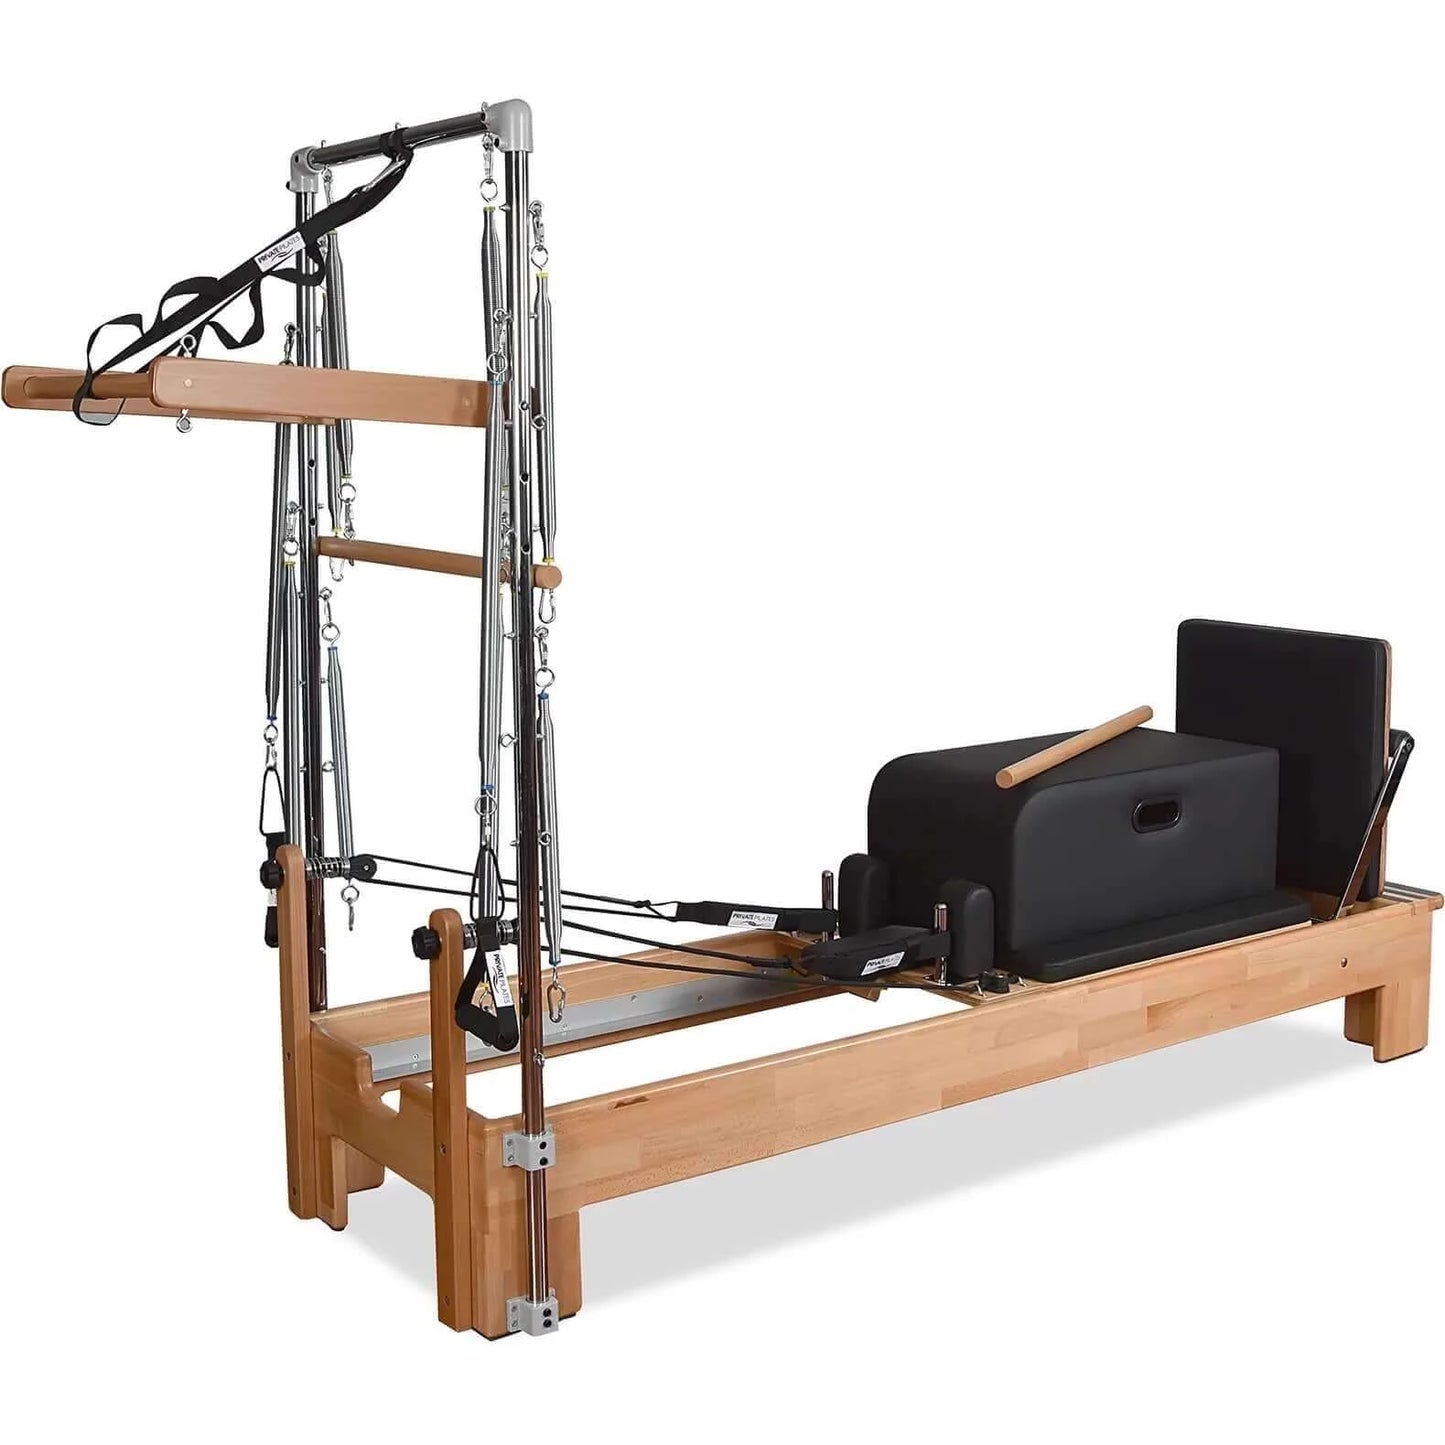 Black Private Pilates Wood Reformer With Tower by Private Pilates sold by Pilates Matters® by BSP LLC